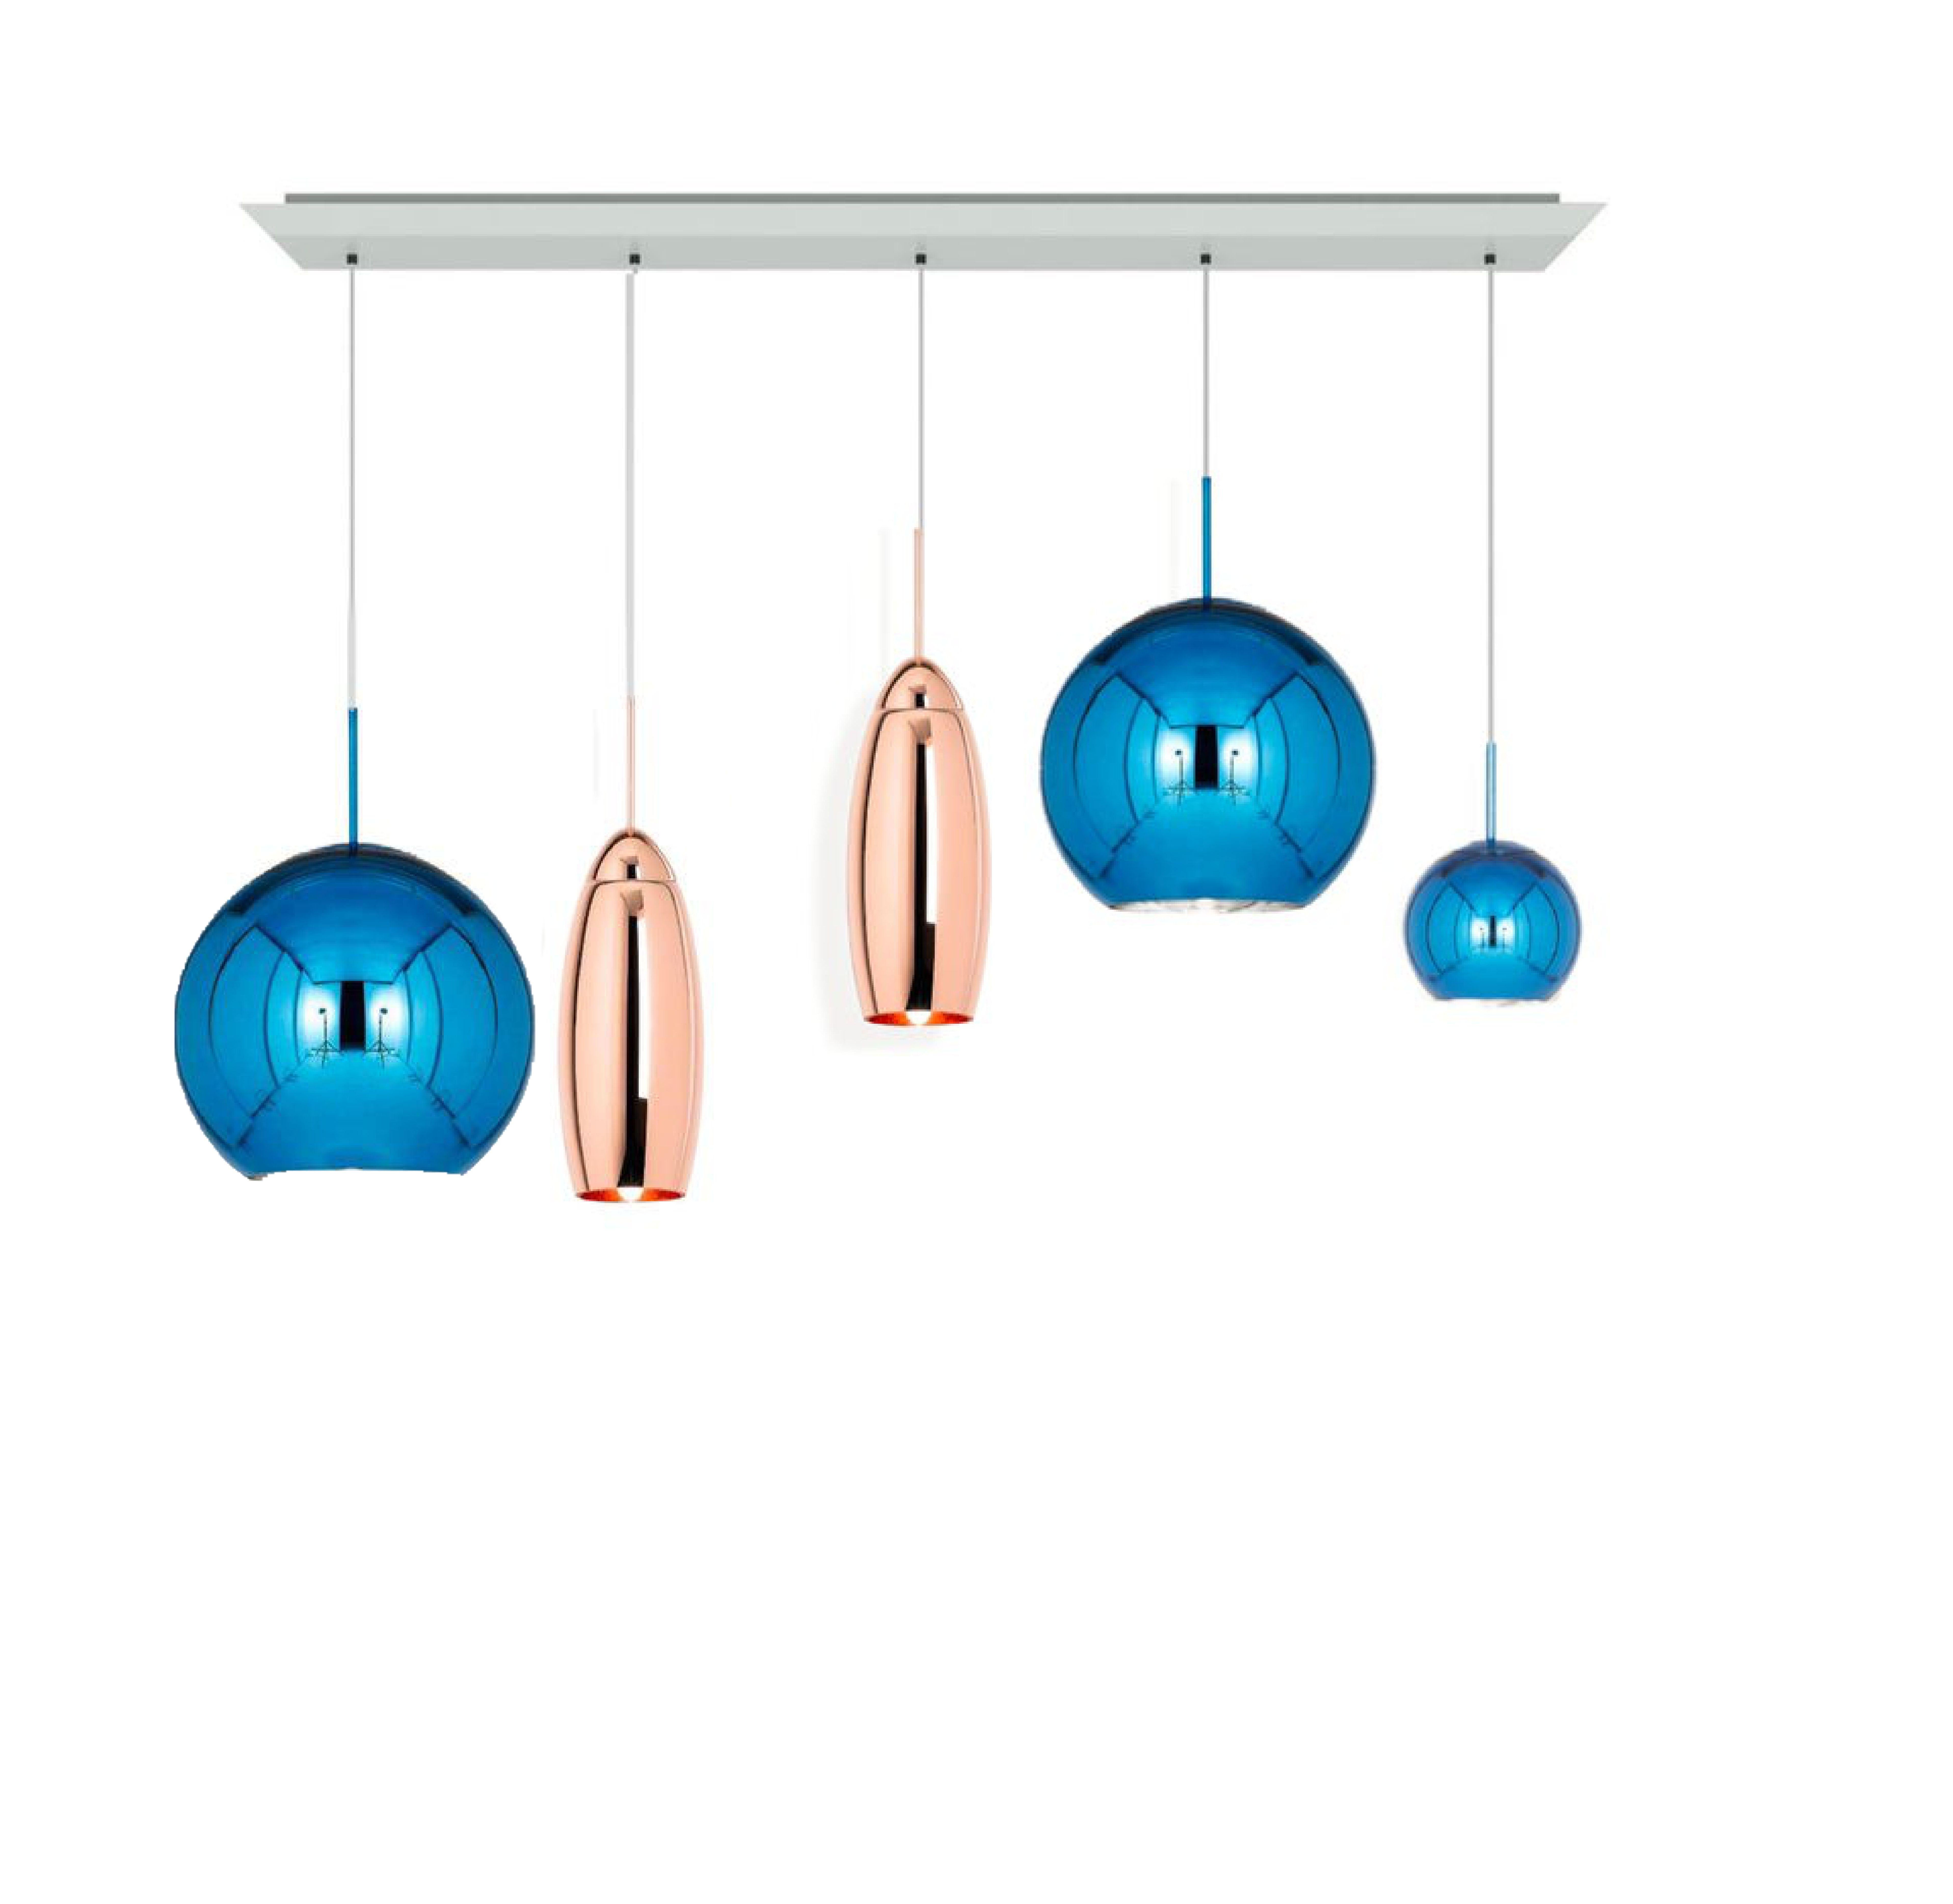 Custom Tom Dixon Linear pendant chandelier Set of 5, Copper and Blue. All pendants new in box. Ceiling pendant also new in box. 2 Blue Copper 45 cm, 1 Blue Copper 25 cm, 2 tall Copper, 5-hole linear pendant. All of the pendants are new-in-box and